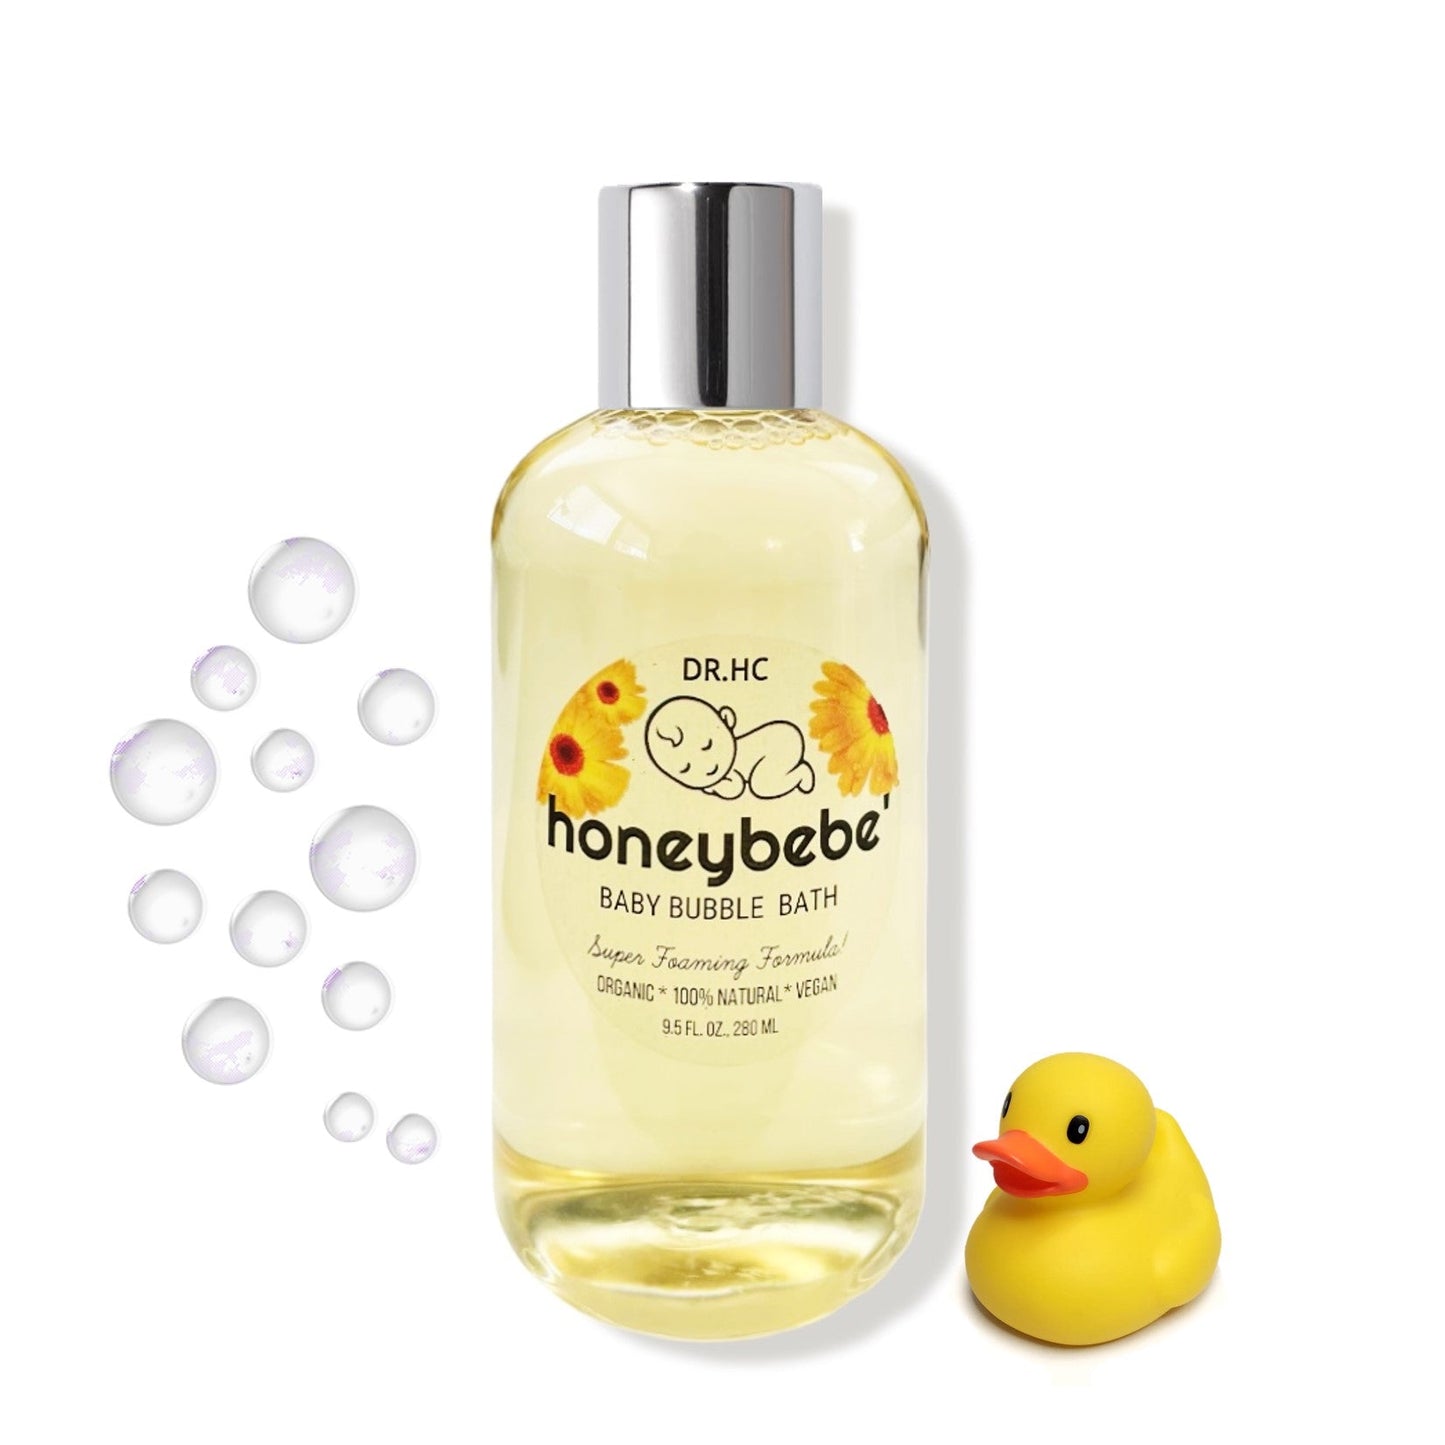 DR.HC Honeybebe' Organic & All-Natural Baby Bubble Bath (Refreshing Patchouli) - For Baby & Mommy (9.5 fl.oz., 280 ml)